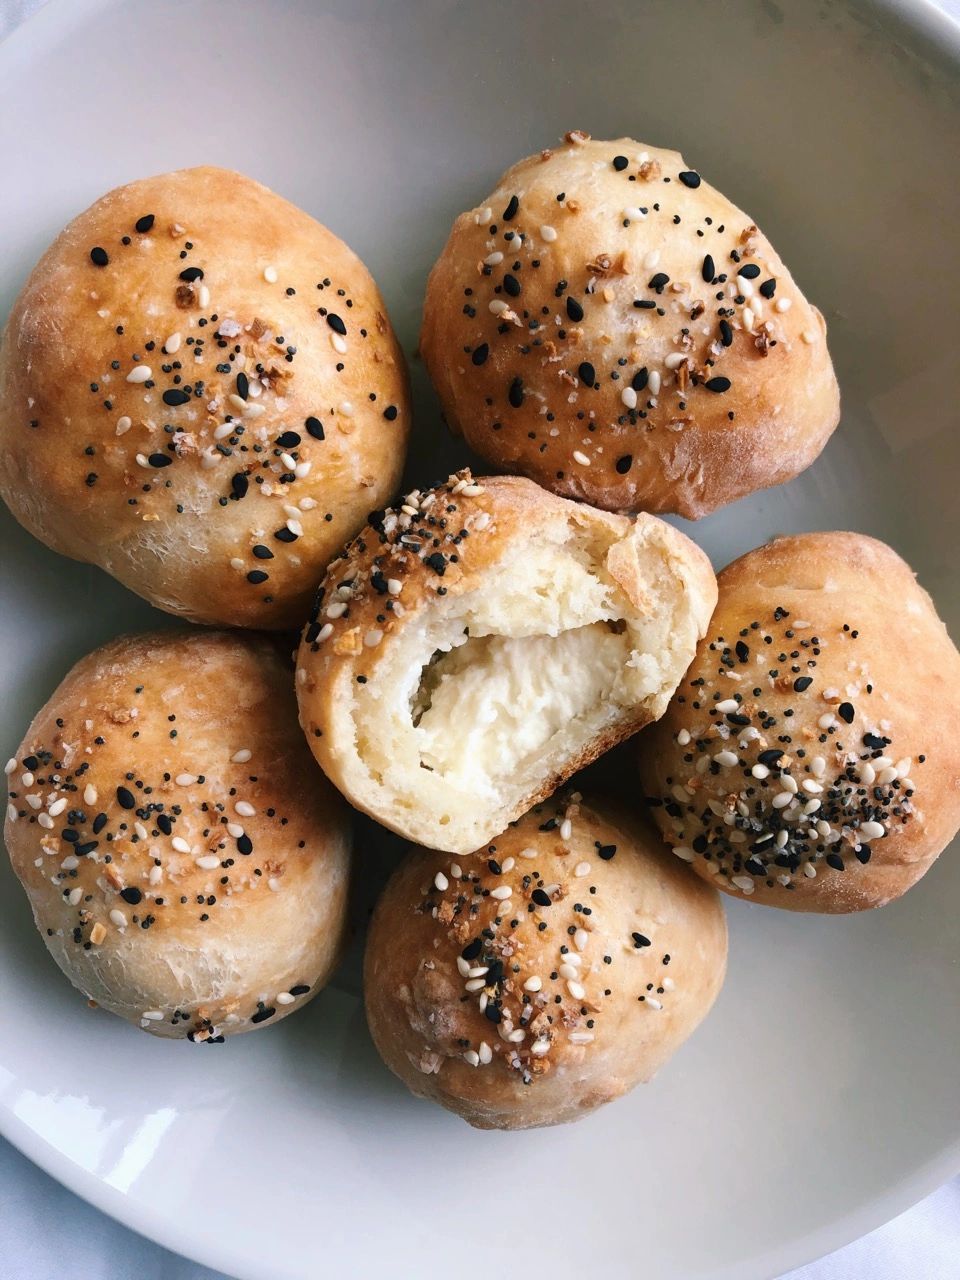 Six small bagel balls with everything seasoning; the center has a bite taken out of it, exposing its cream cheese filling